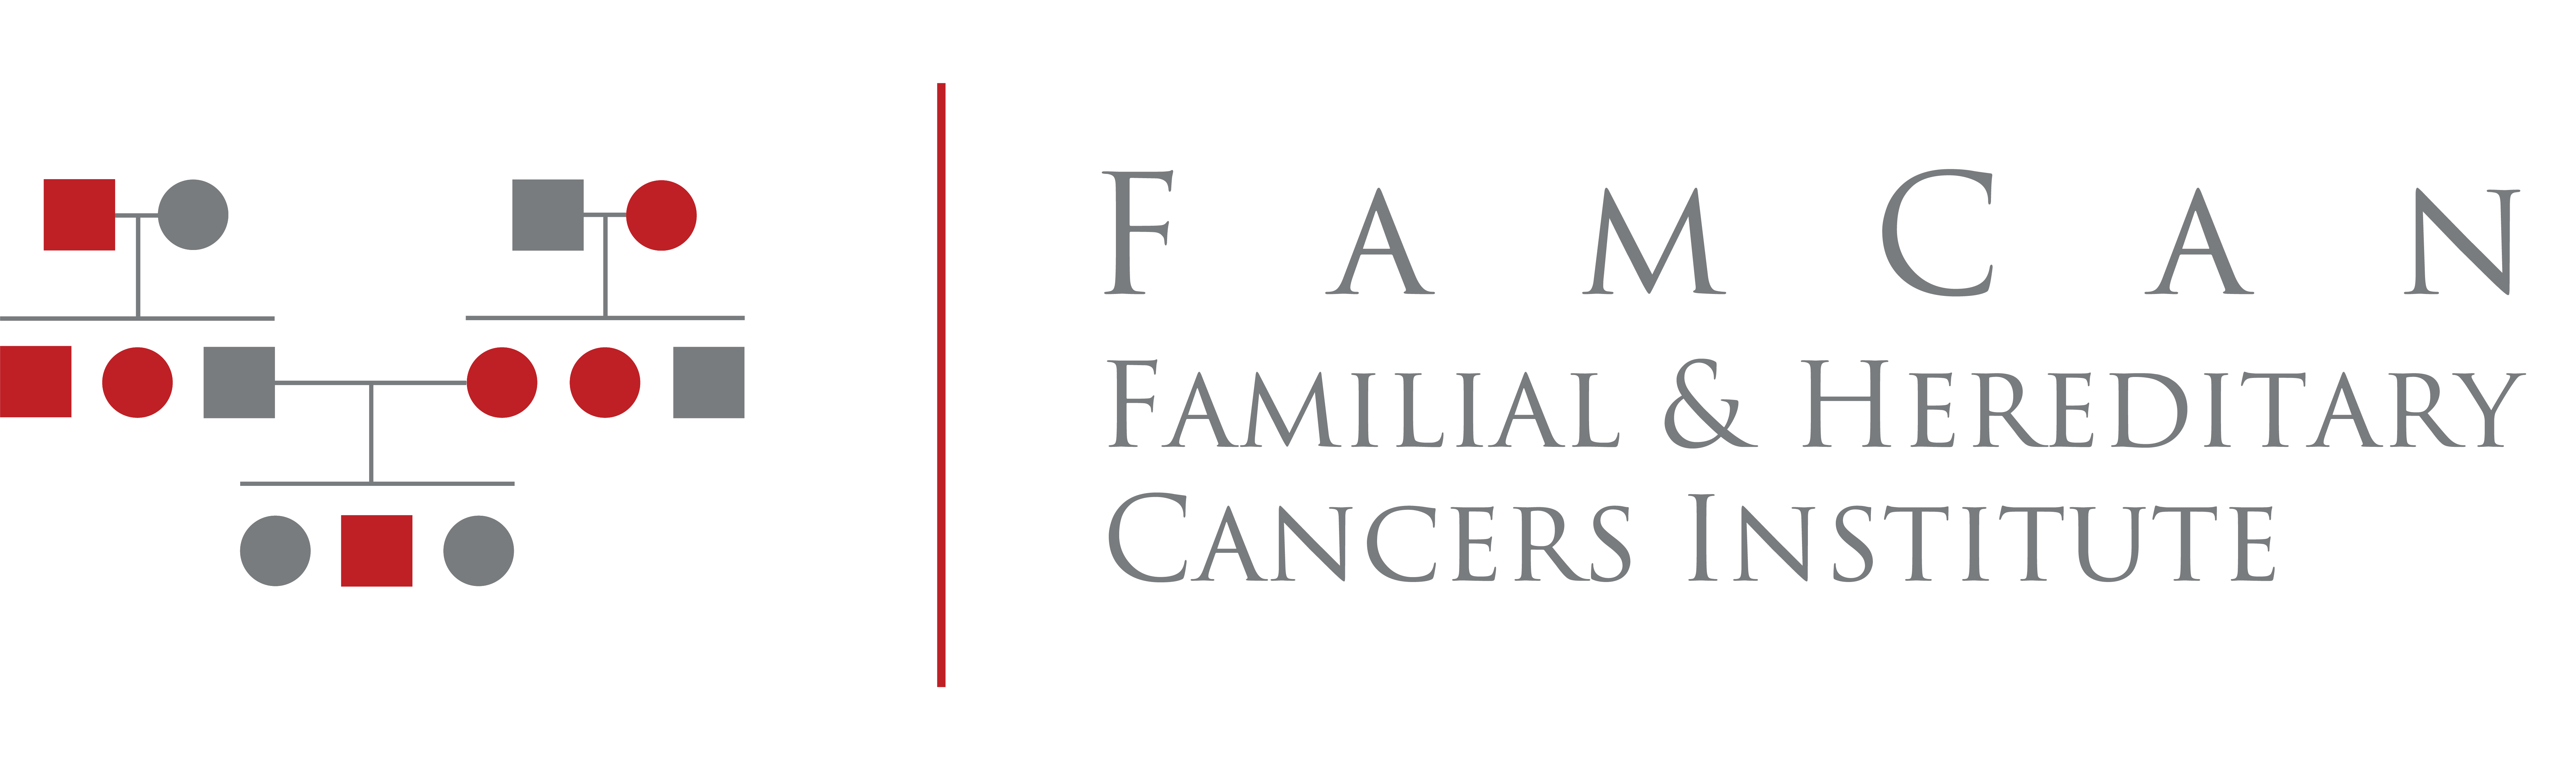 Familial & Hereditary Cancers Institute